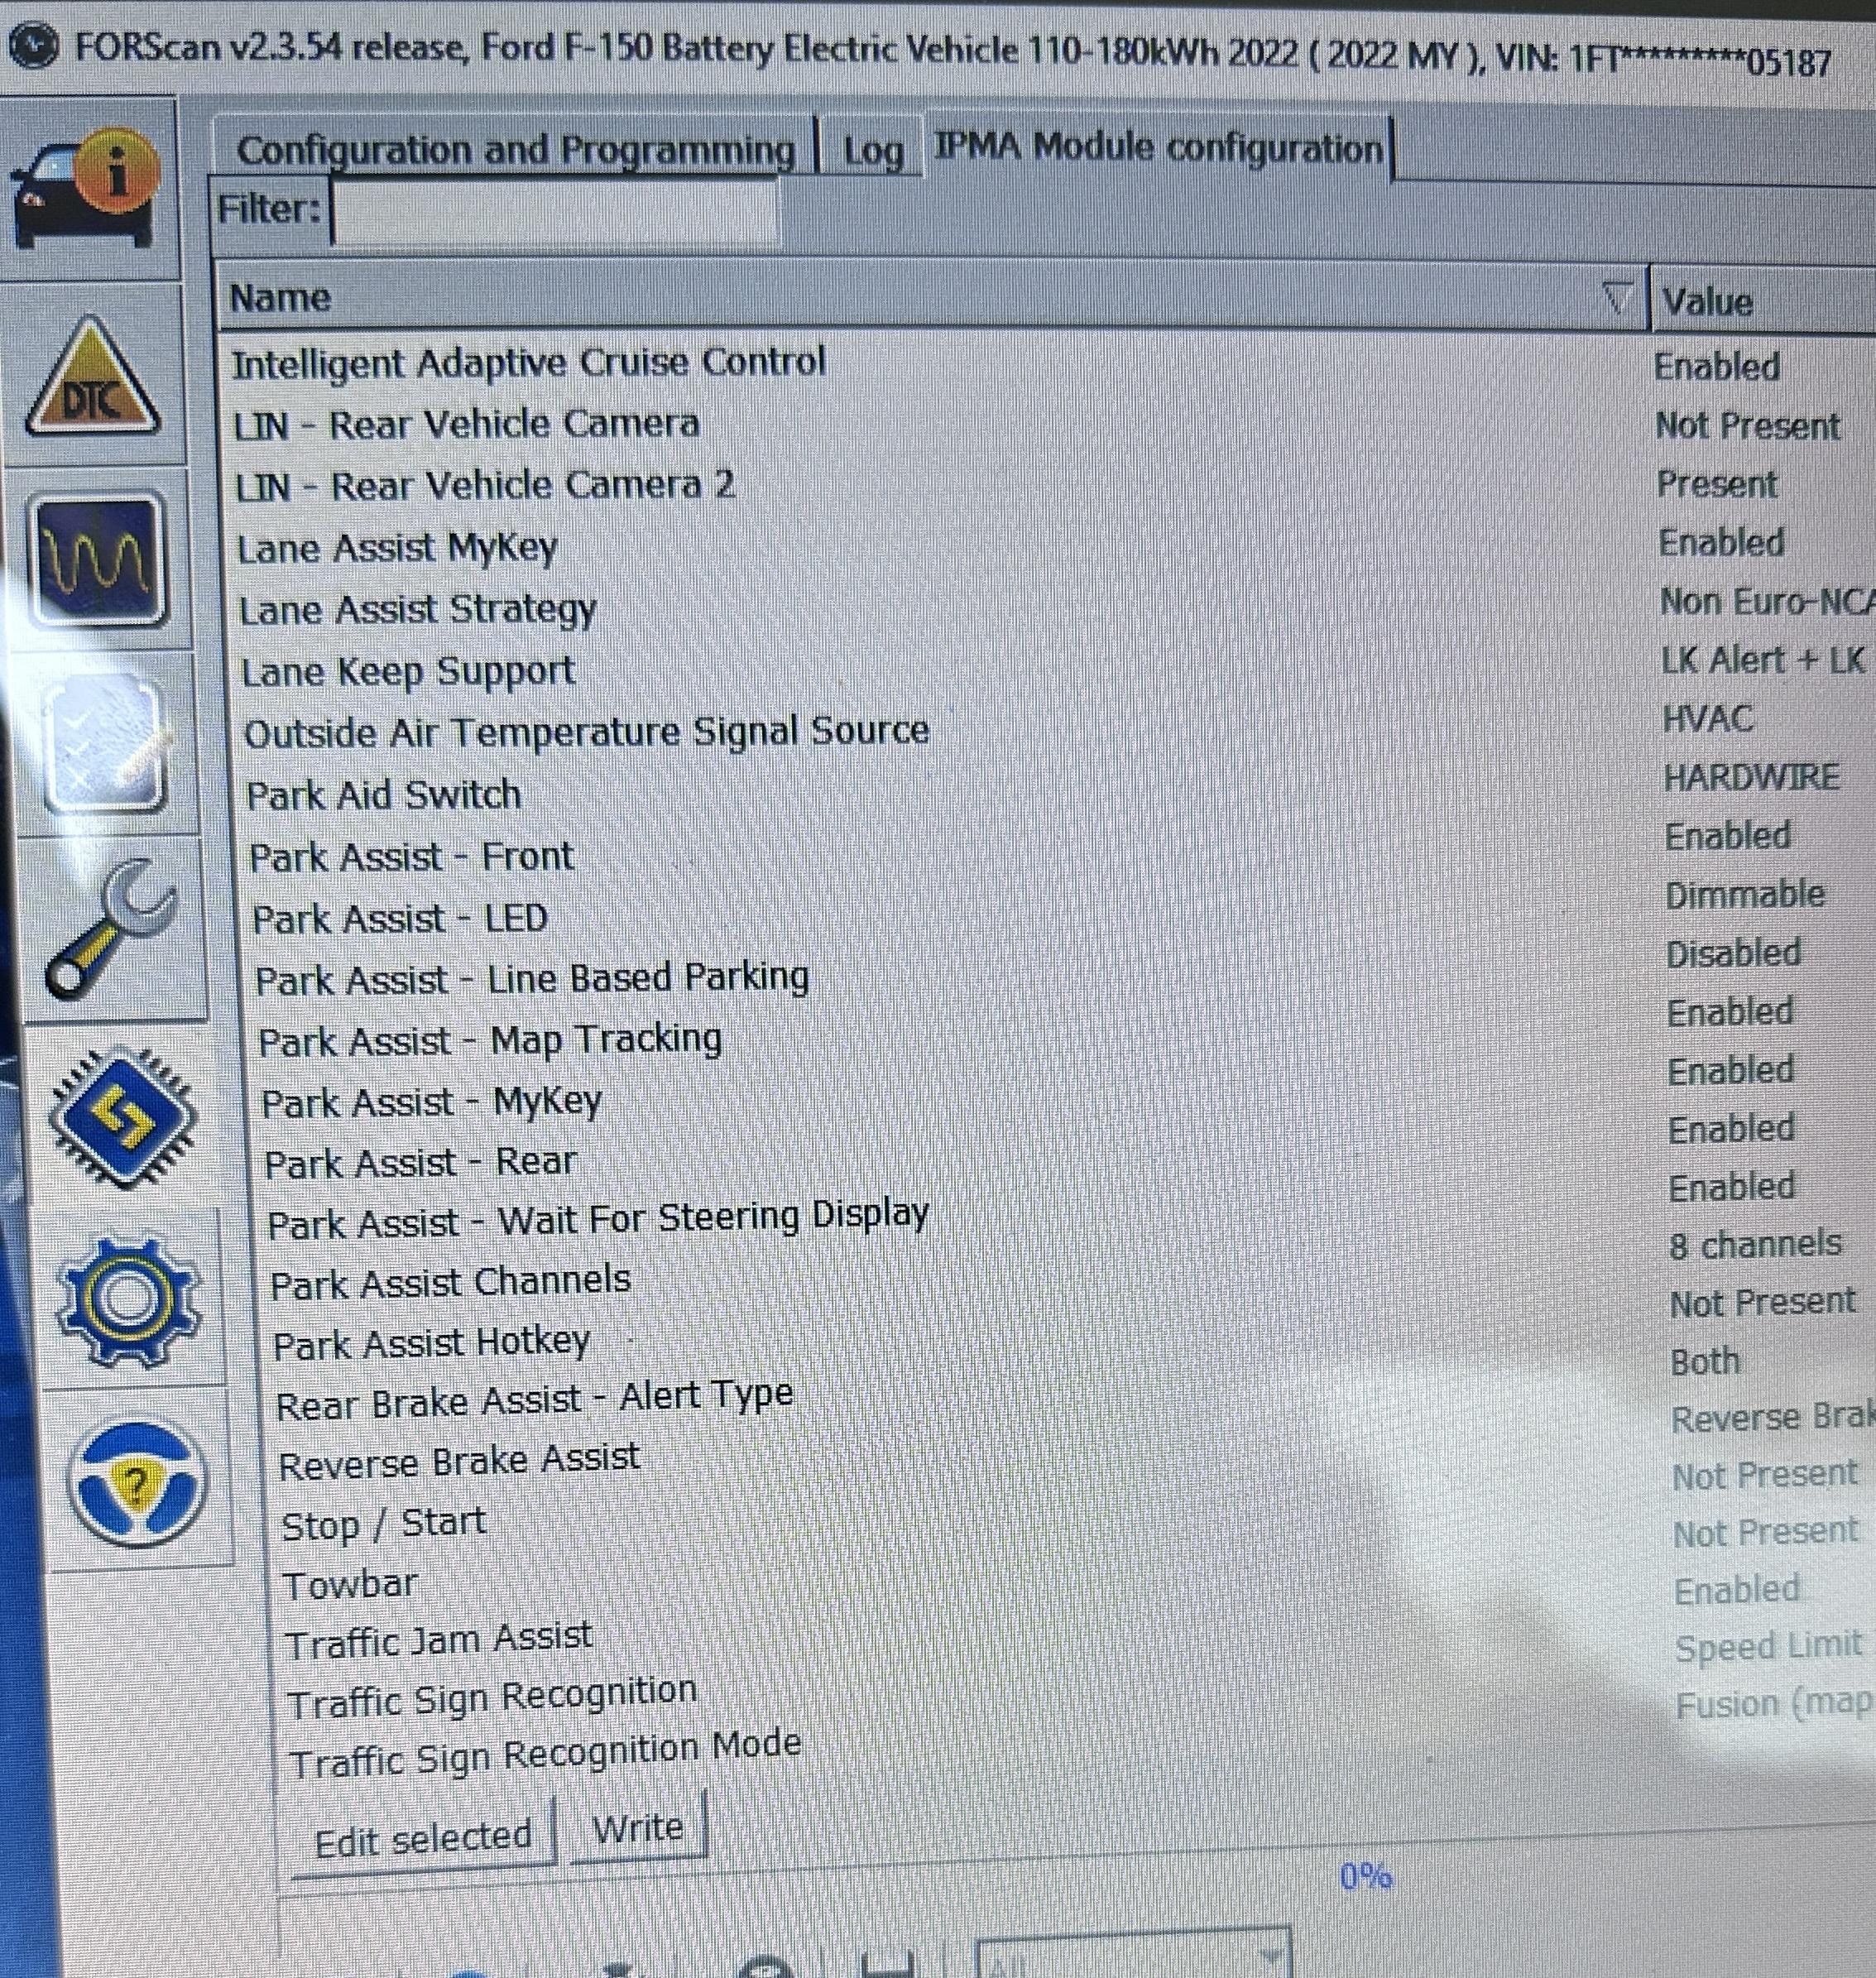 Vehicle profiles in FORScan - FORScan forum